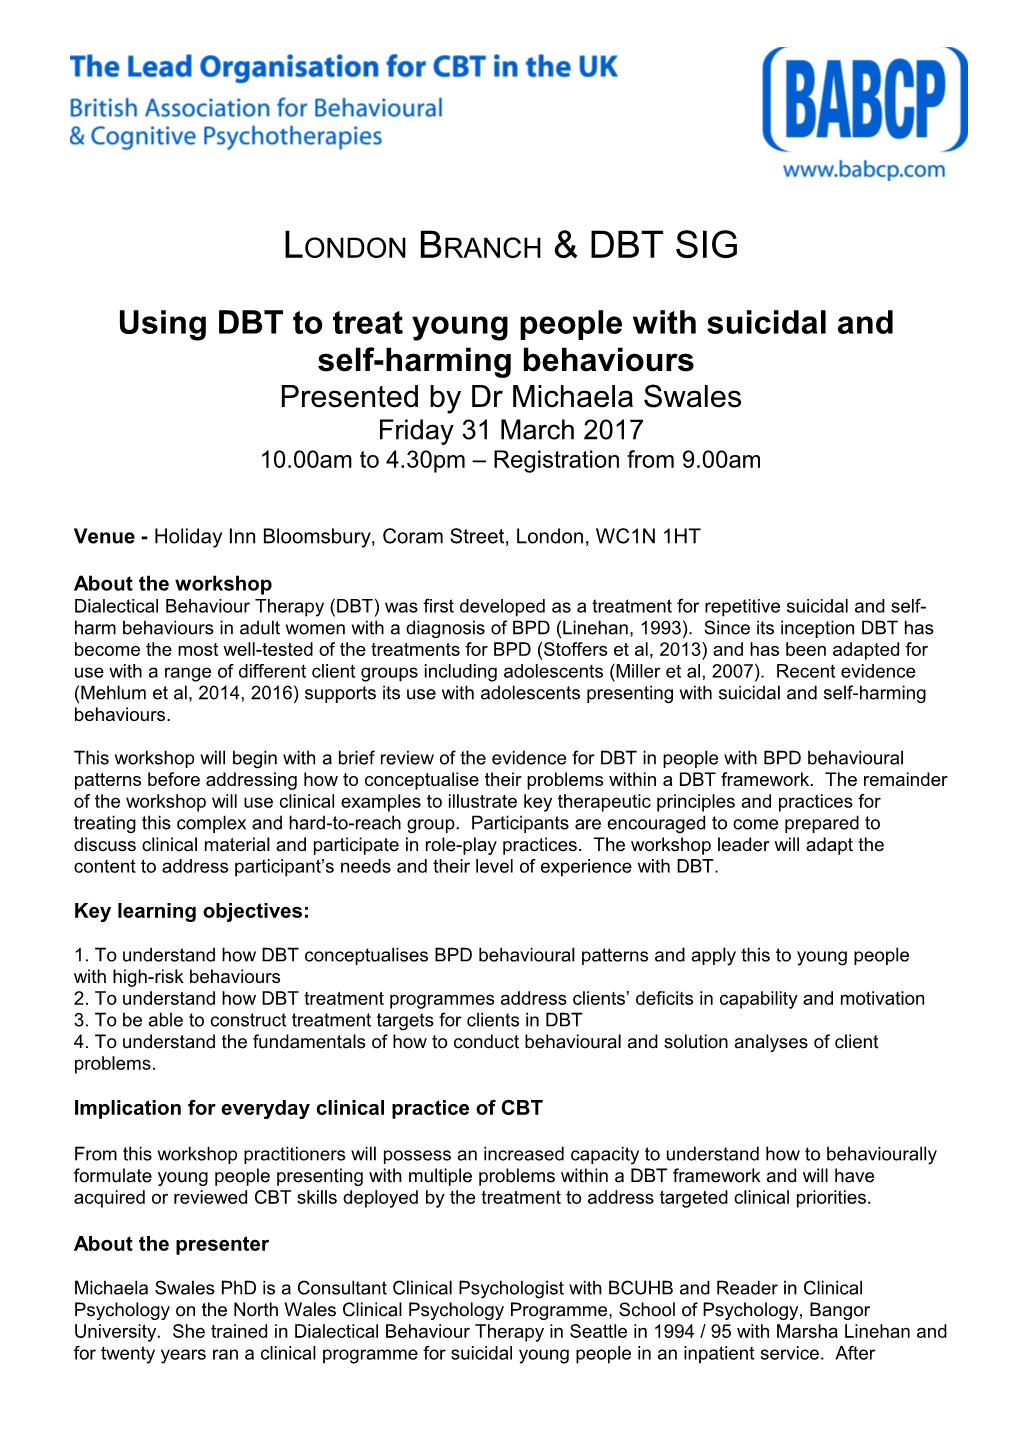 Using DBT to Treat Young People with Suicidal And